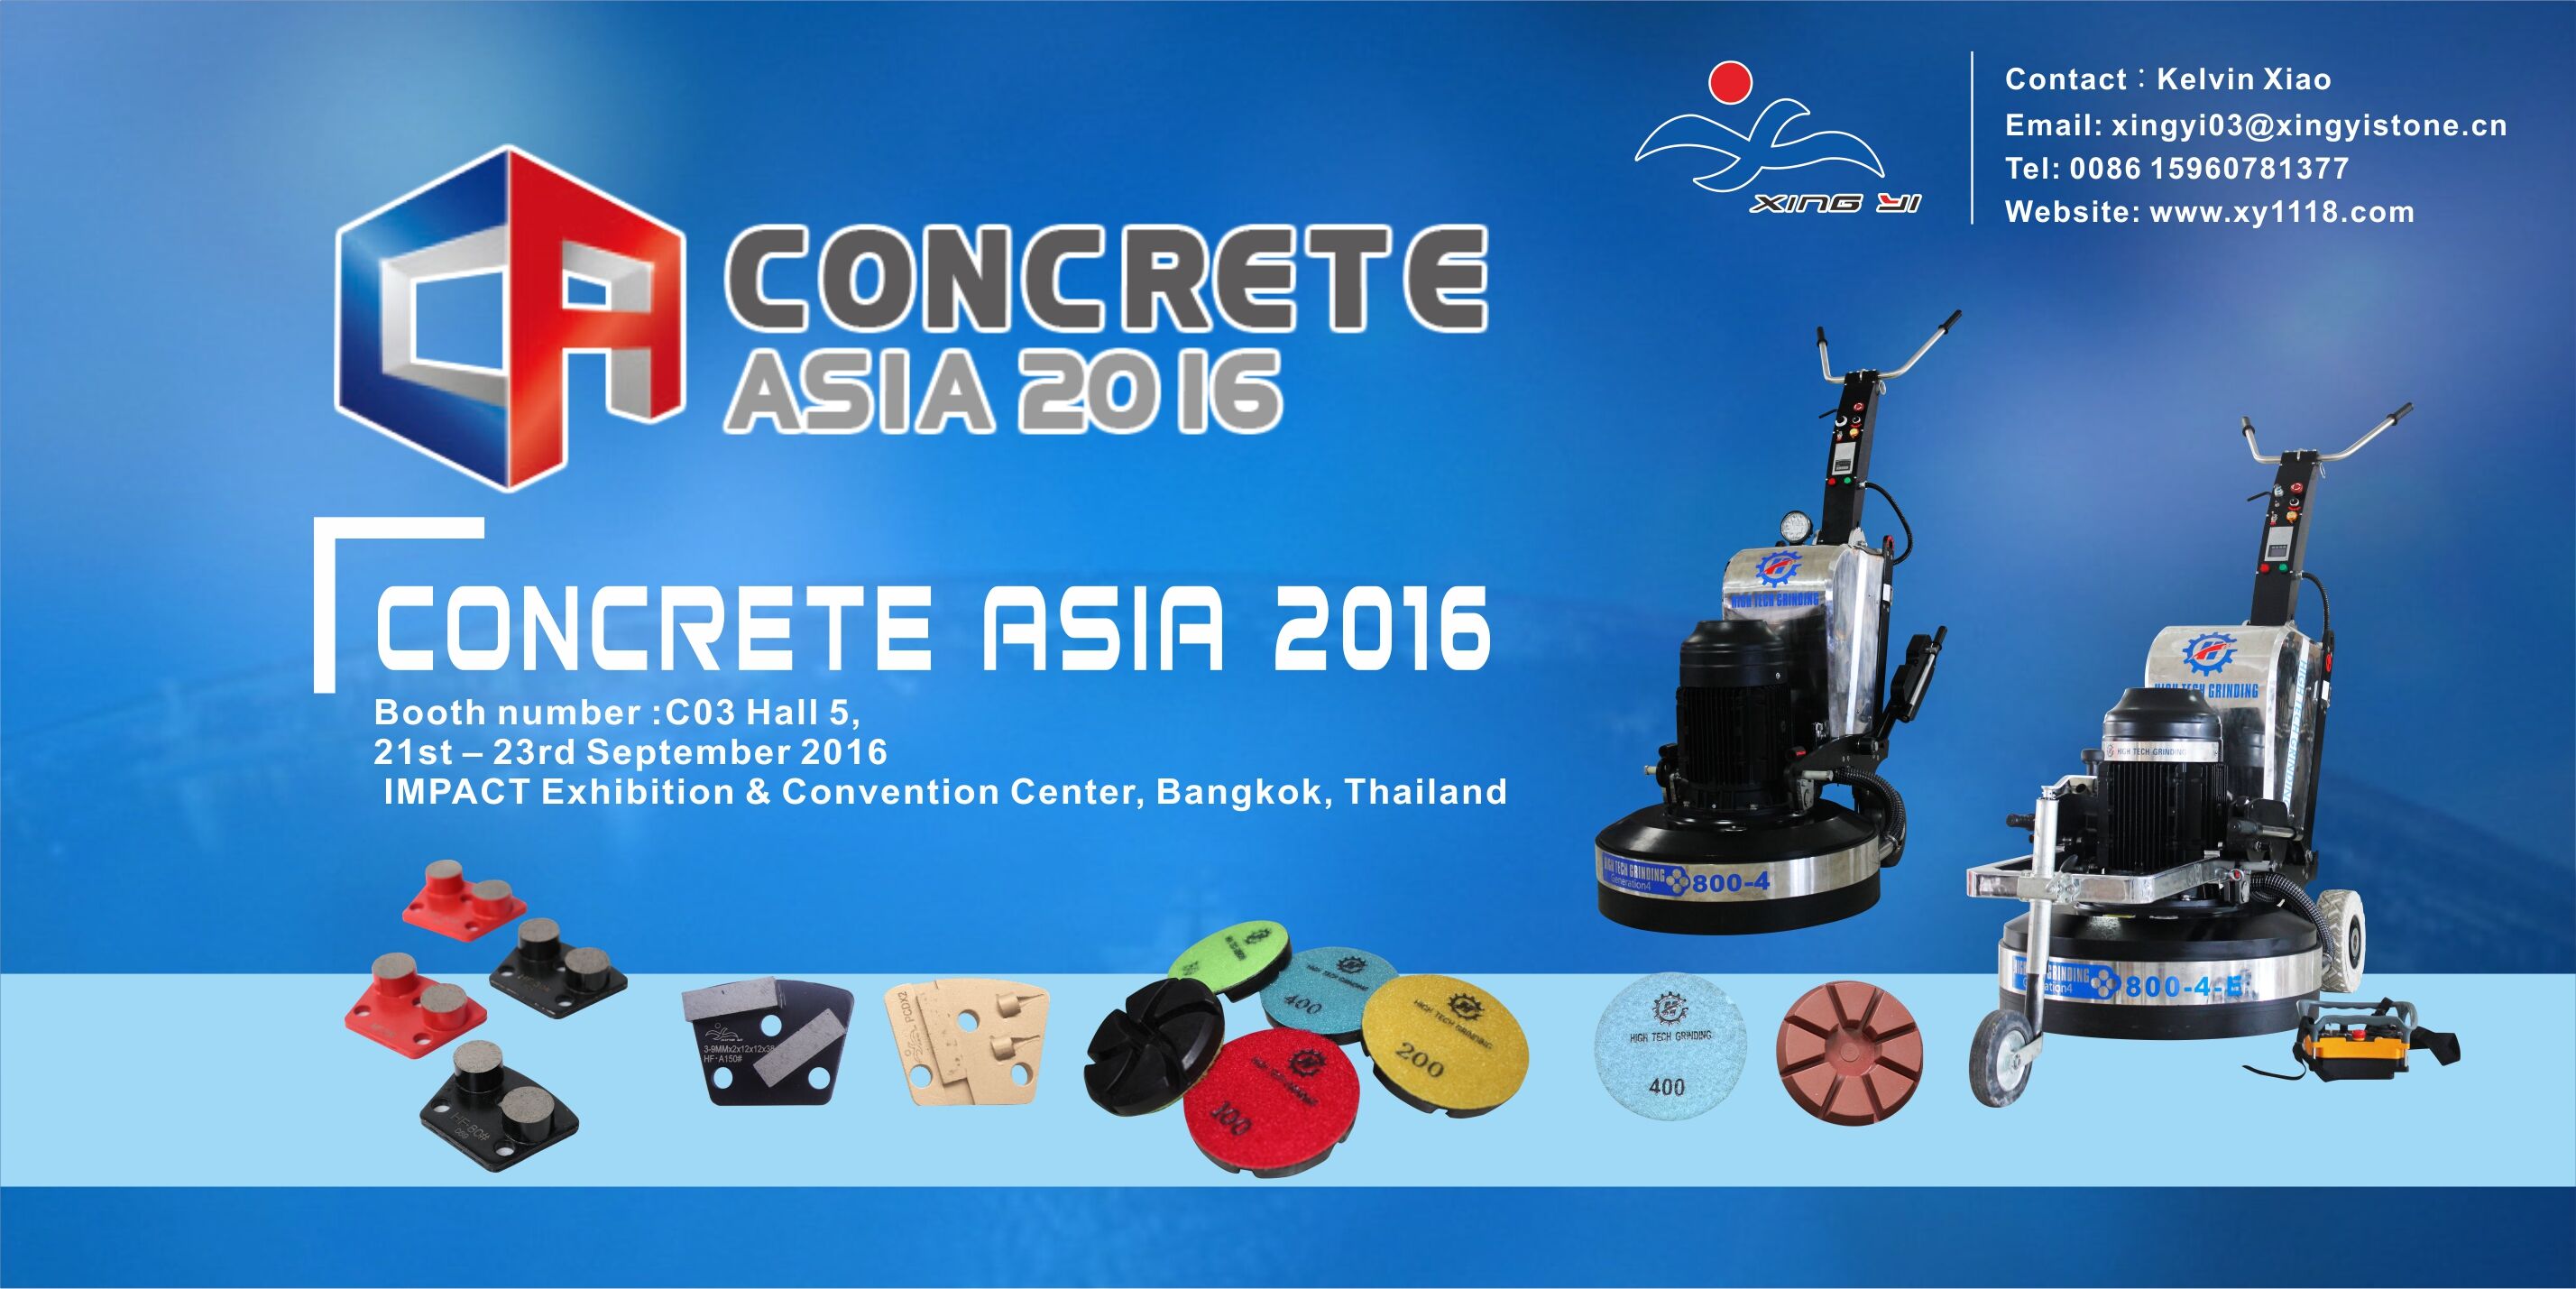 Xingyi Will Meet You At Concrete Asia 2016 in Thailand